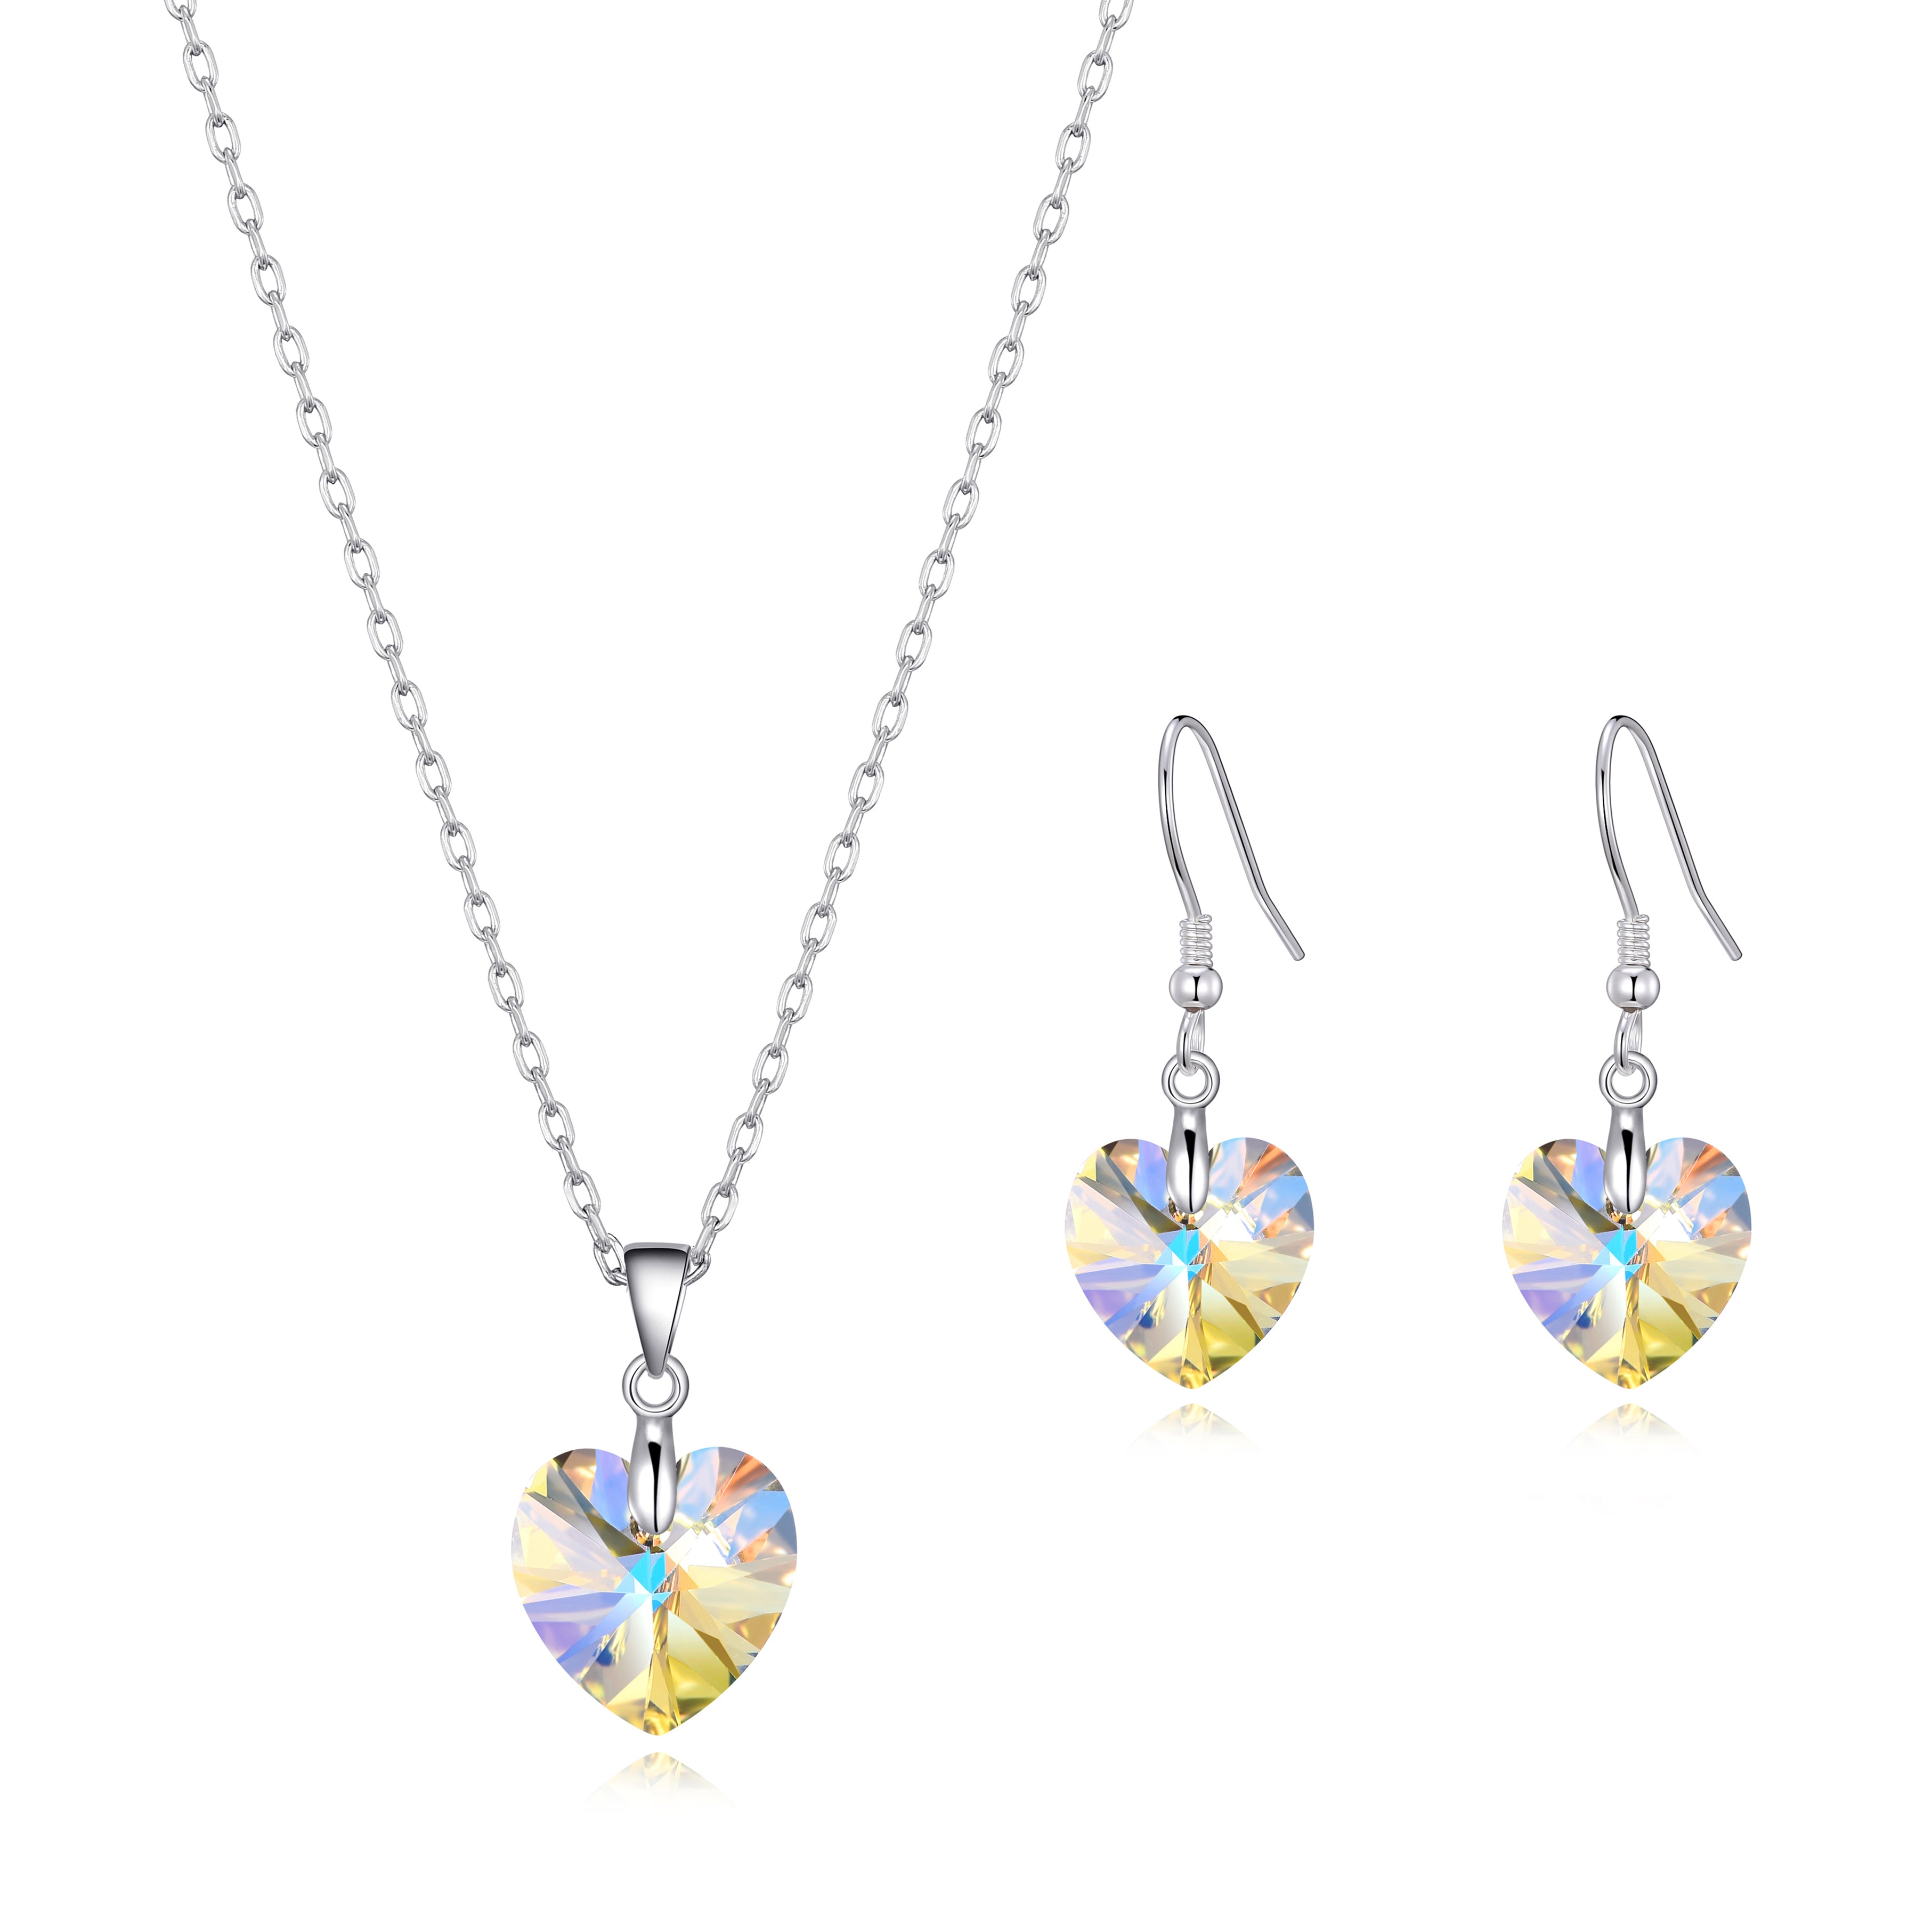 Sterling Silver Aurore Boreale Heart Set Created with Zircondia® Crystals